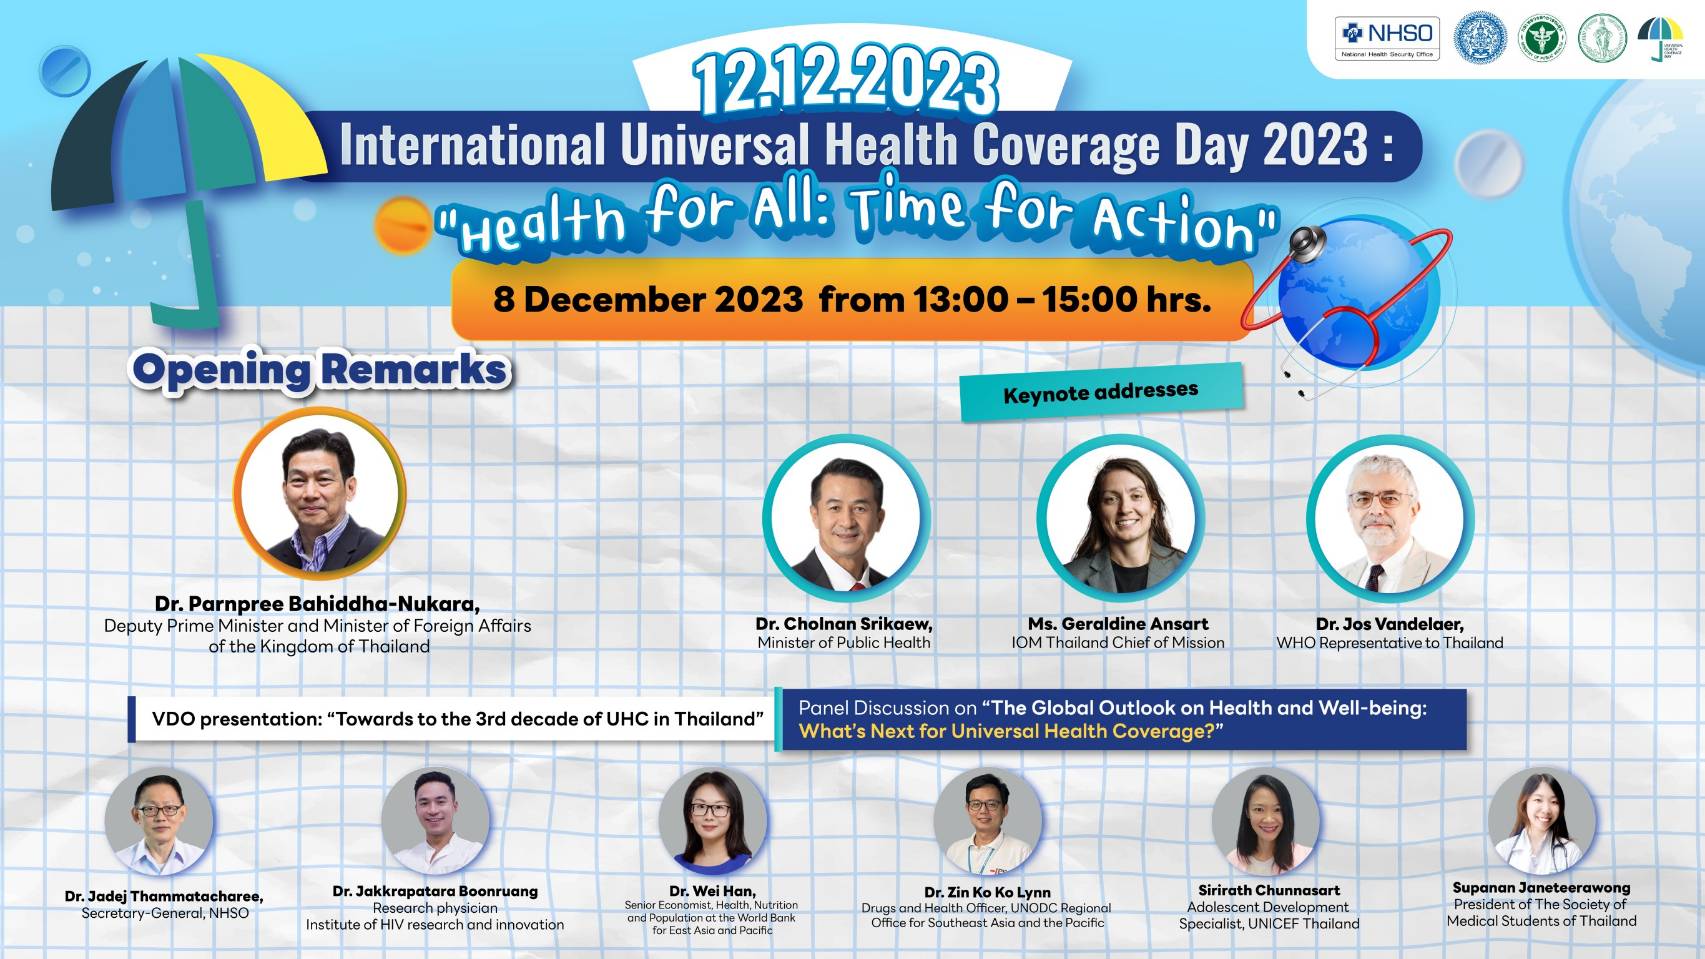 You are cordially invited to The International Universal Health Coverage Day 2023 Celebration “Health for All: Time for Action” Friday, 8 December 2023, 09.00 – 15.00 hrs. 